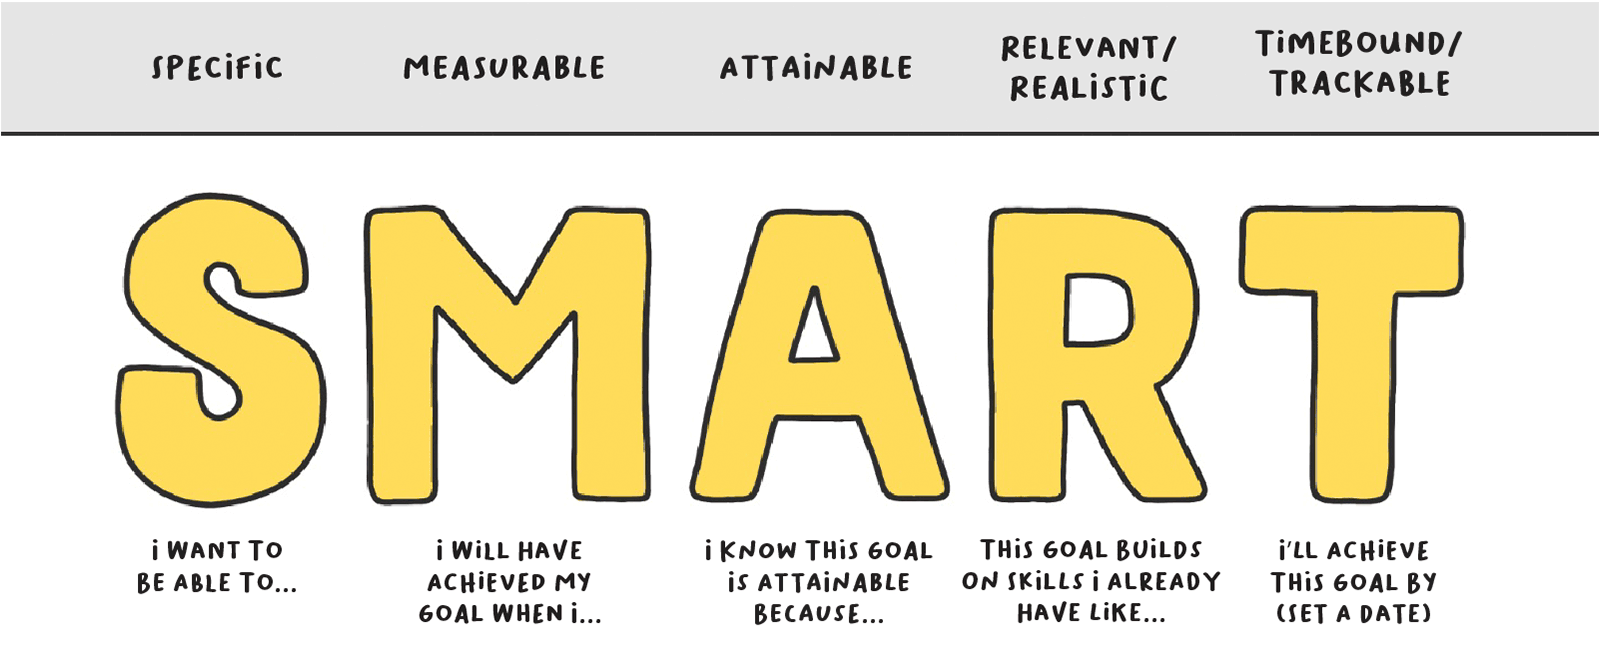 Questions to ask to see if your goals are smart